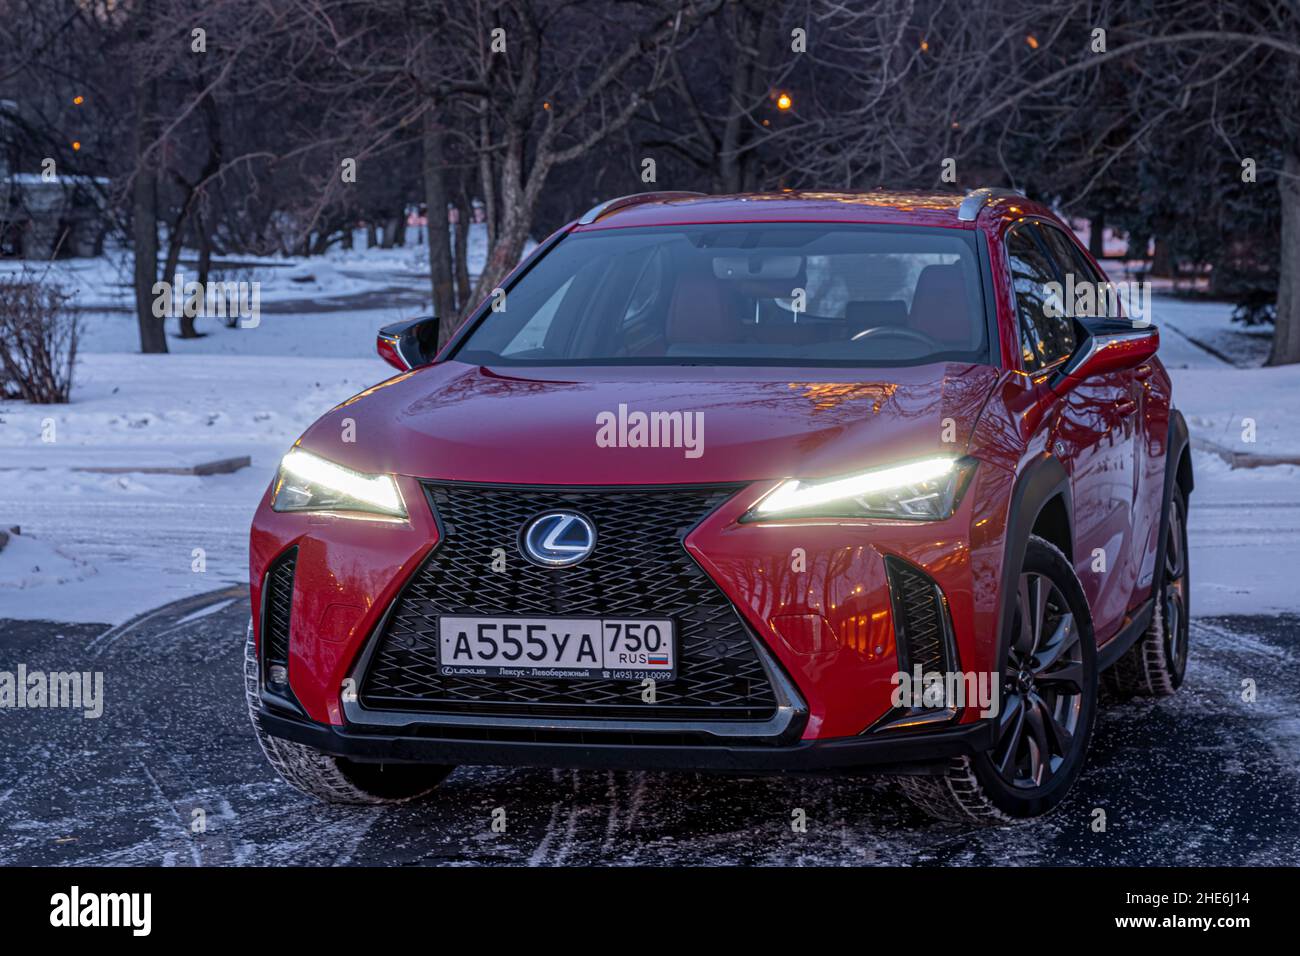 Lexus ux 200 hi-res stock photography and images - Alamy